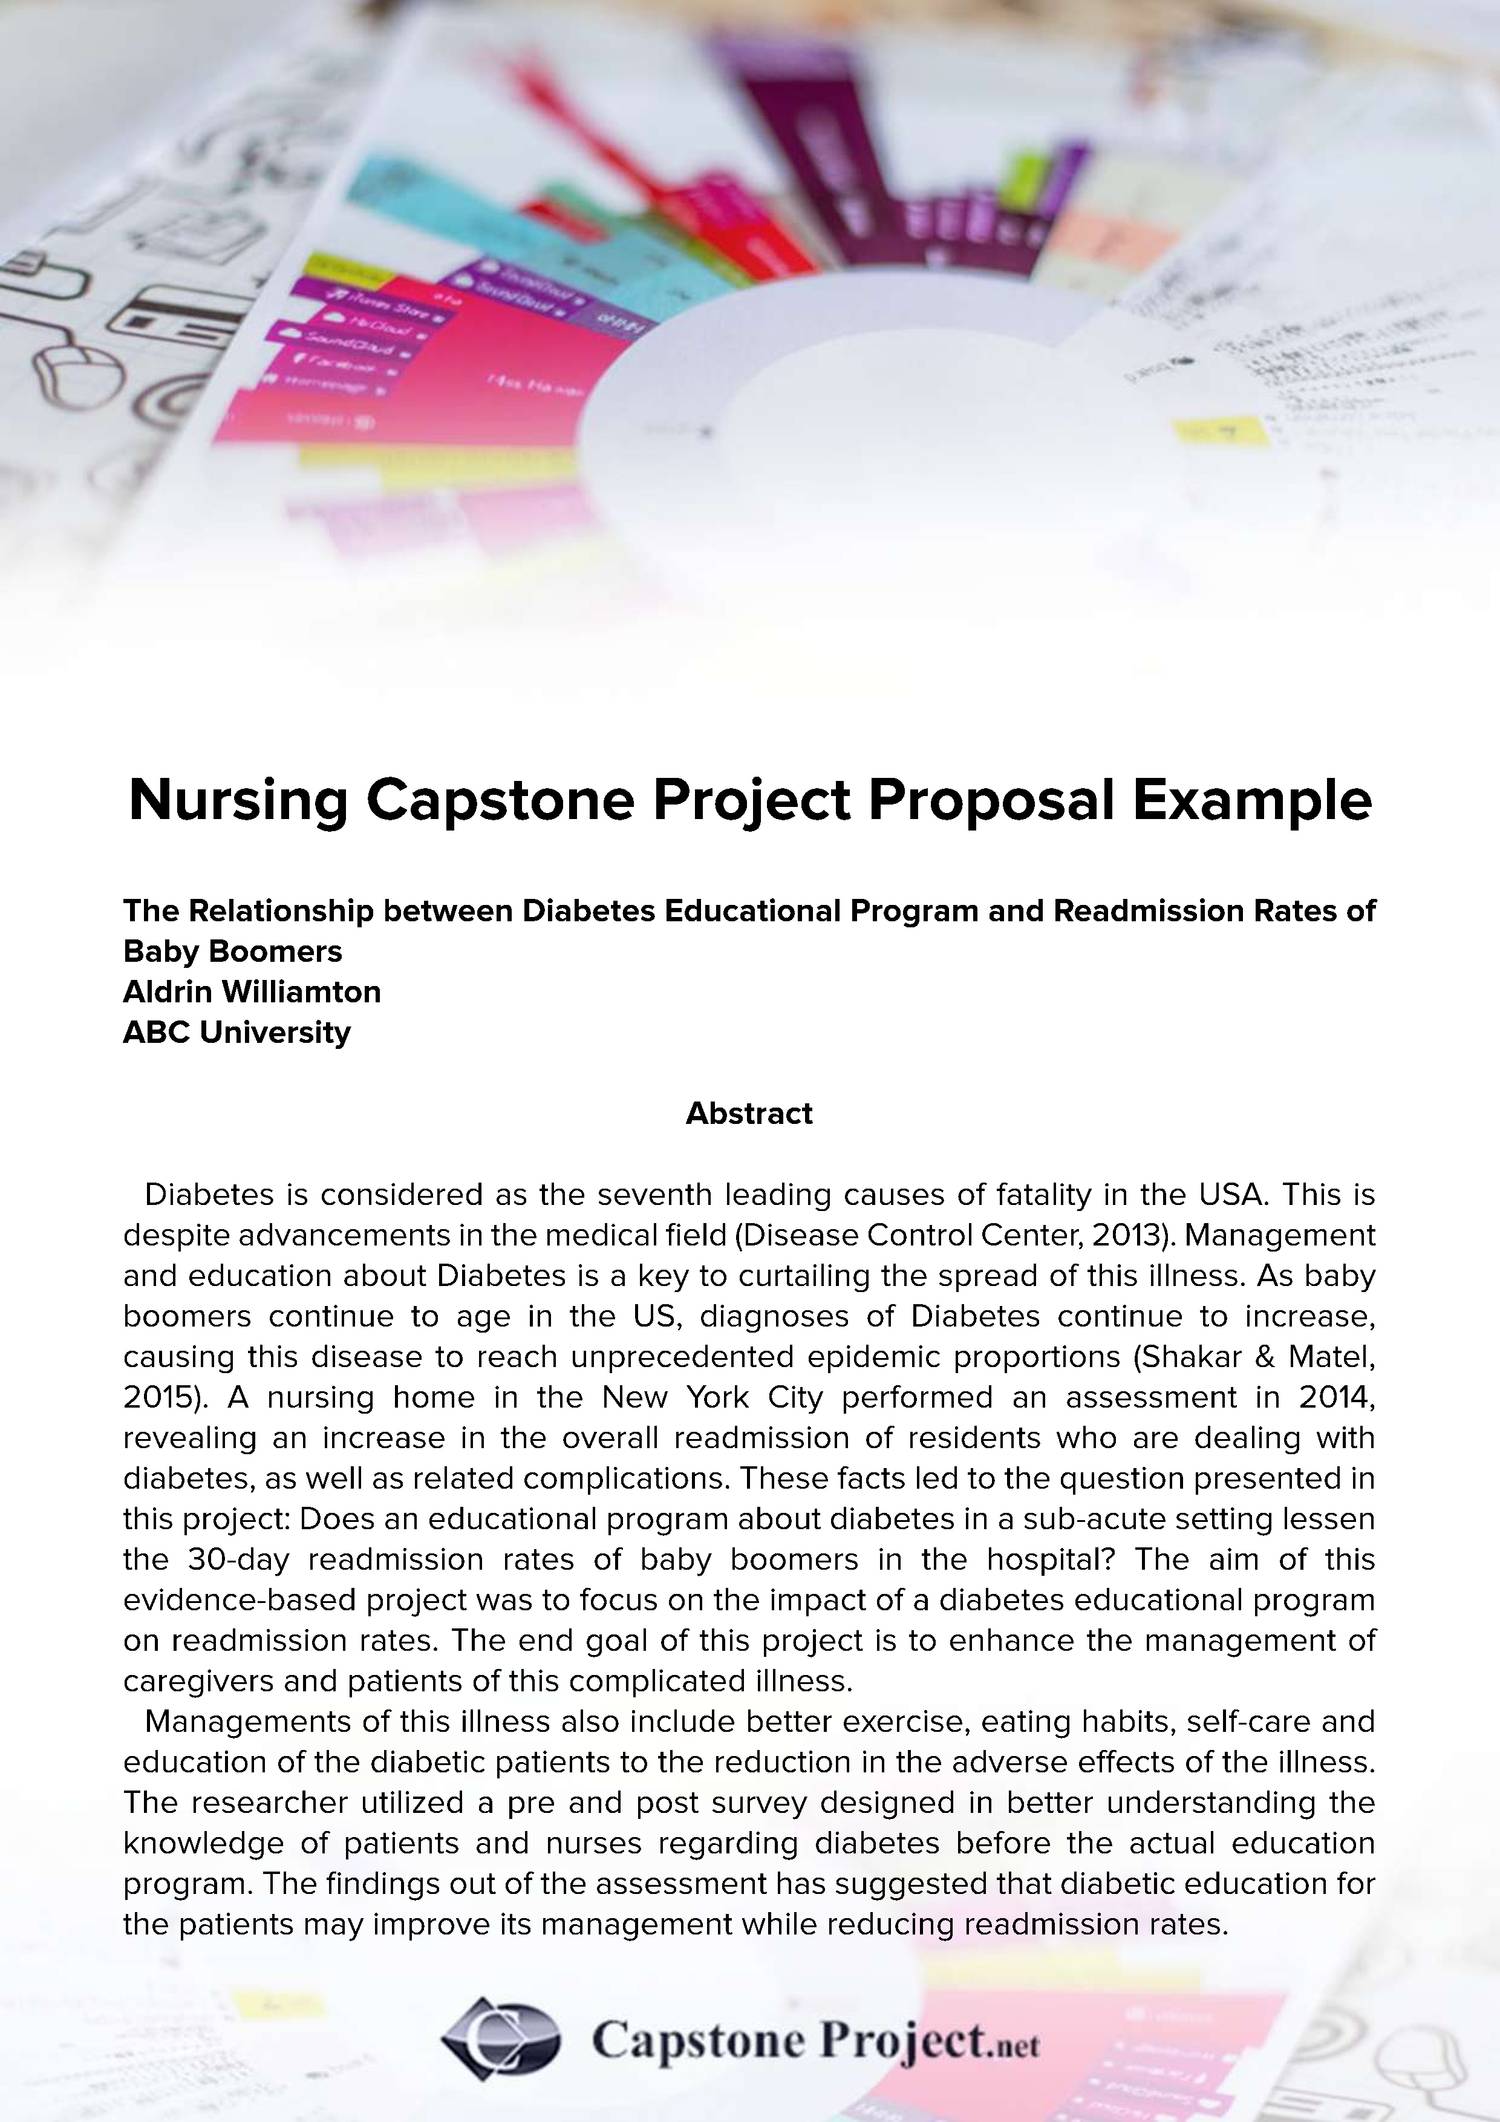 capstone project for nurses examples